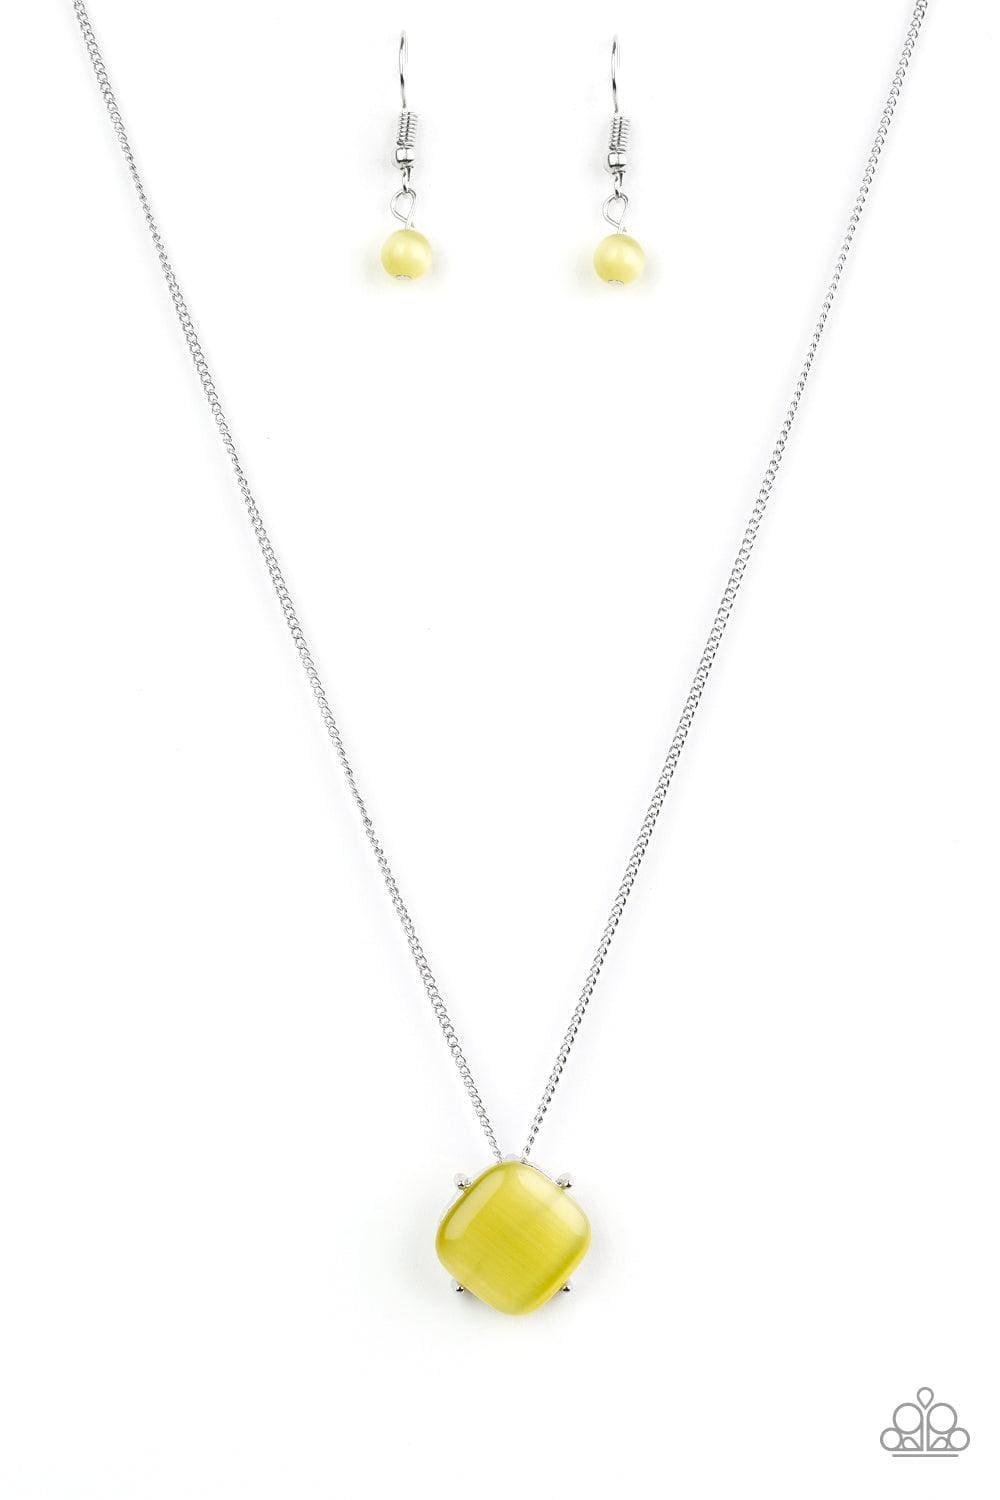 Paparazzi Accessories - You Glow Girl - Yellow Necklace - Bling by JessieK